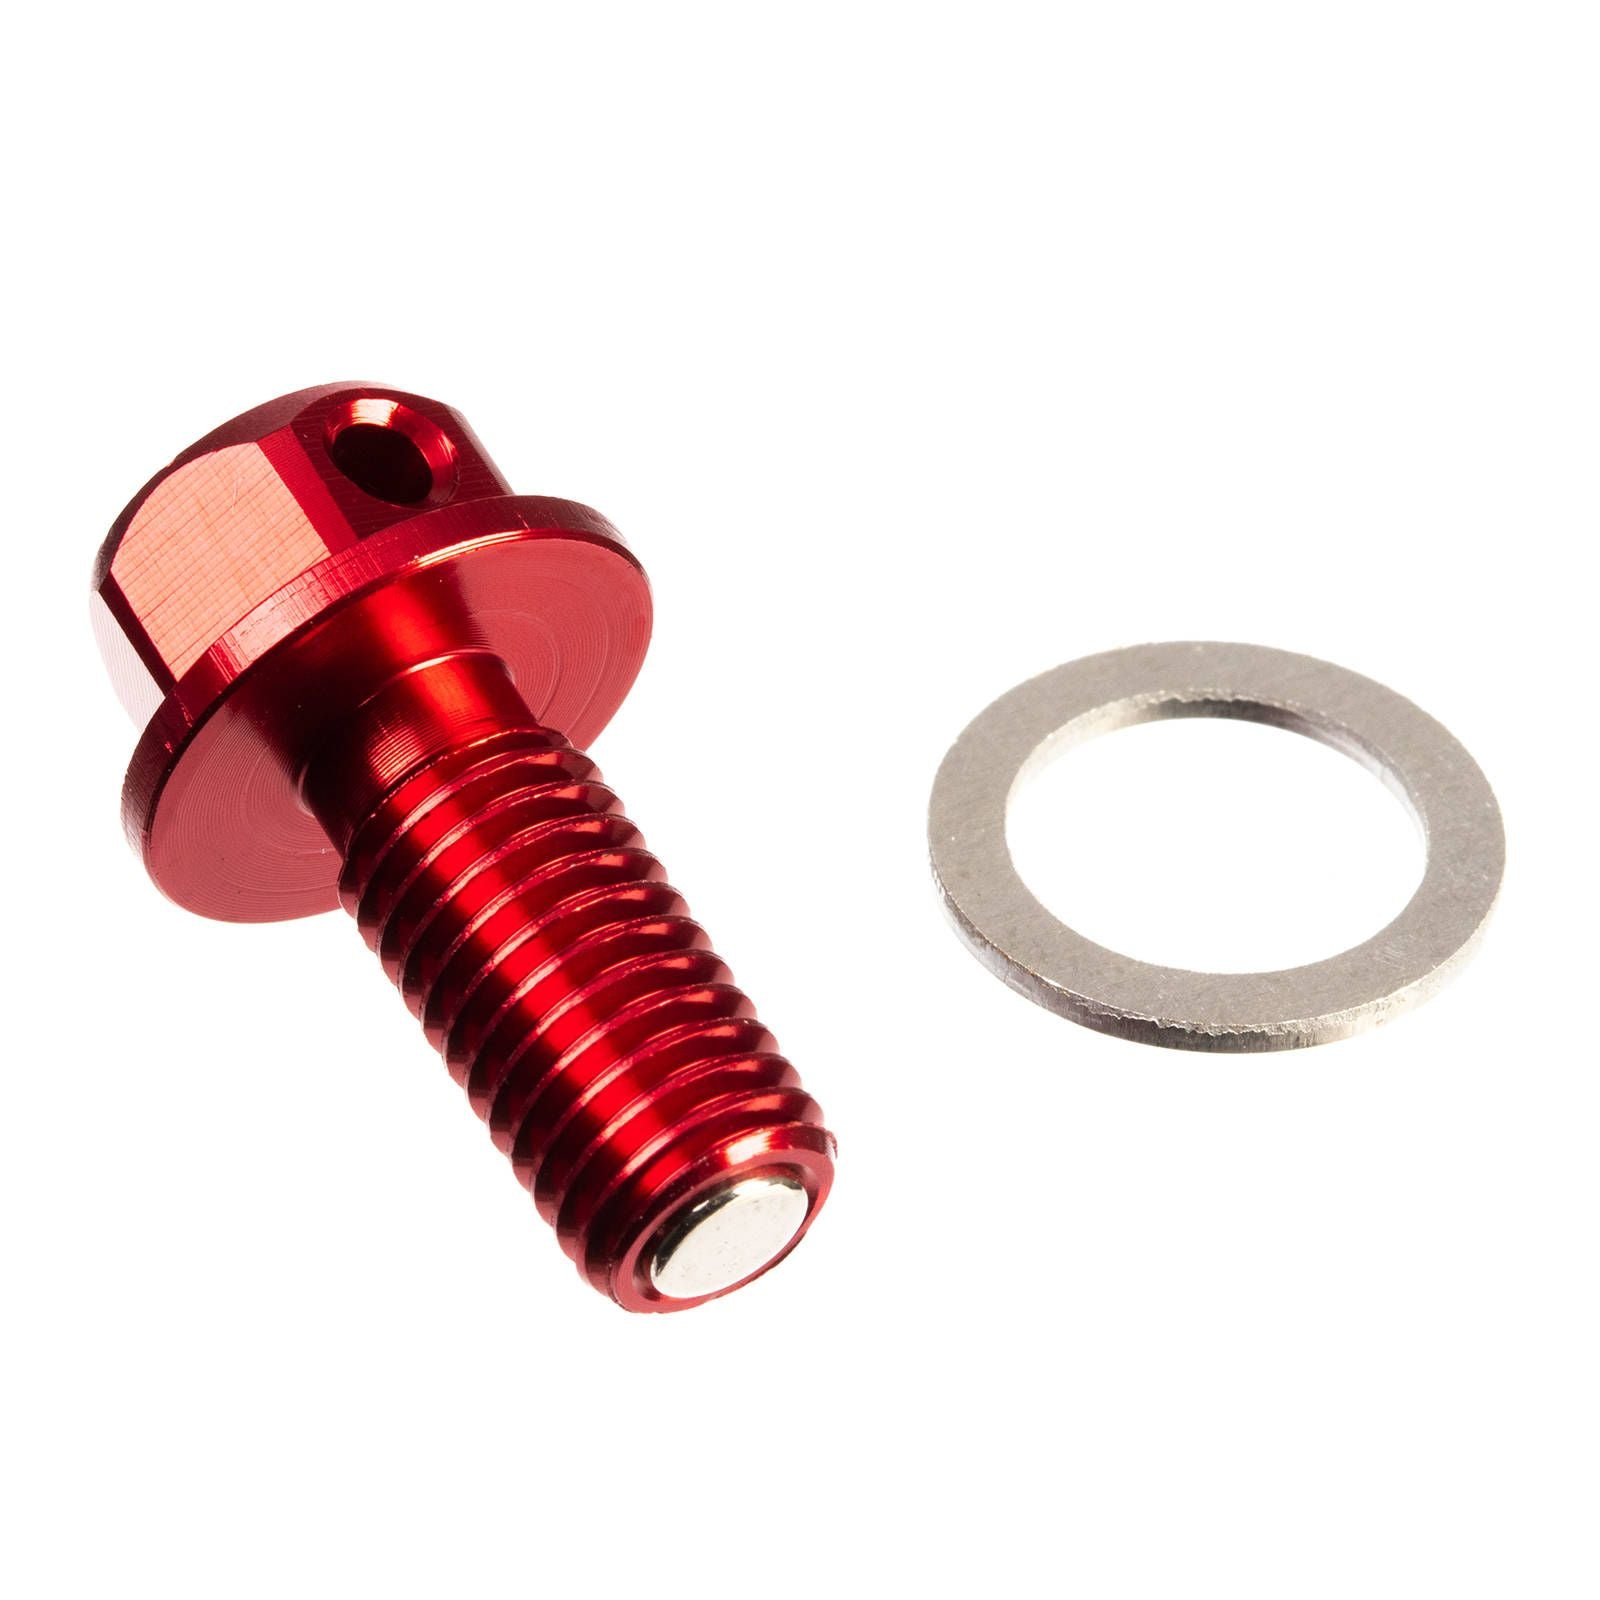 New WHITES Magnetic Sump Plug M10 x 22 x 1.5 - Red #WPMDP102215R